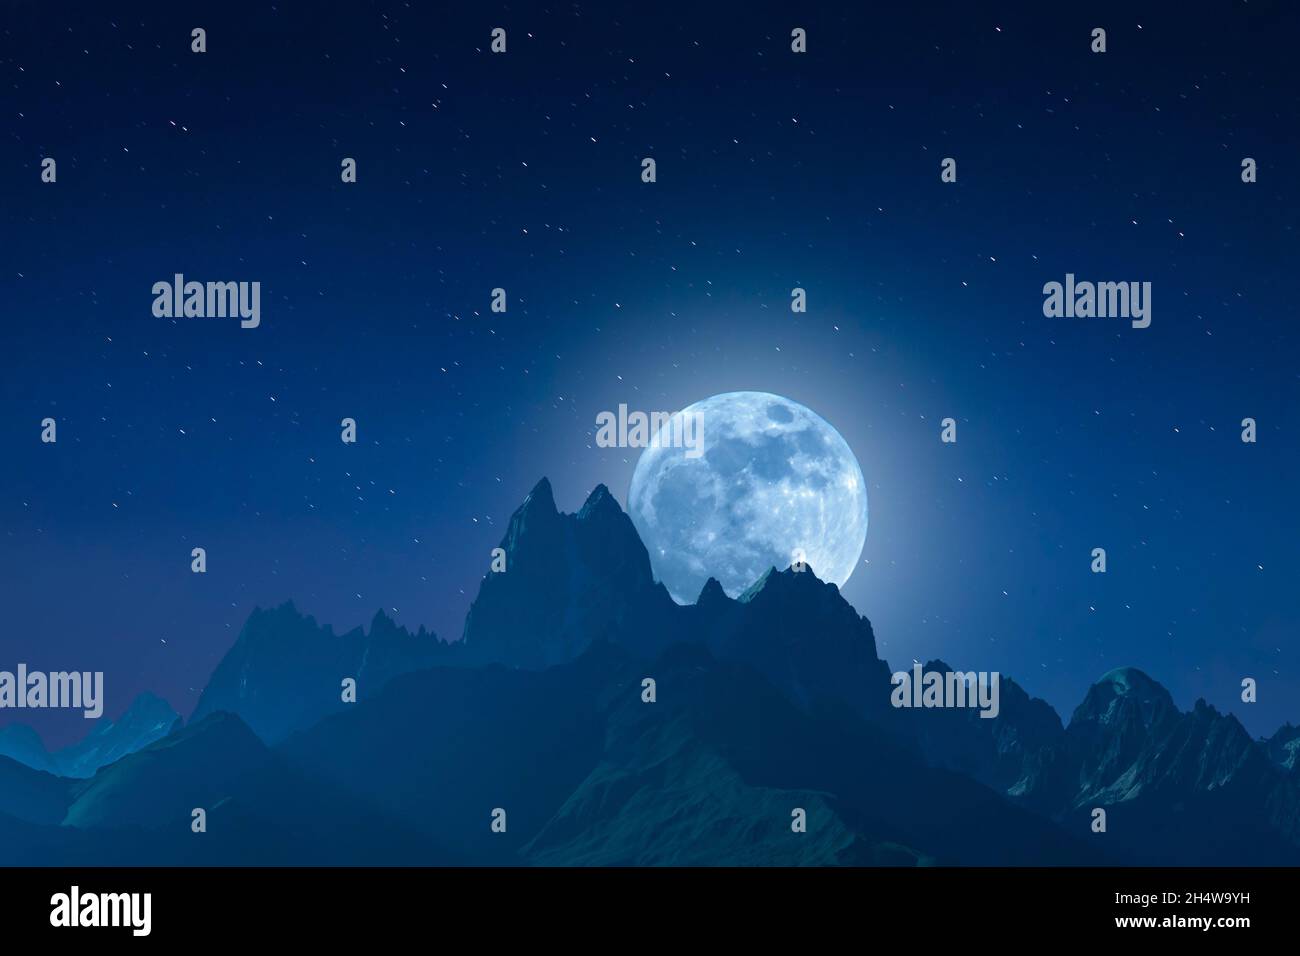 Night landscape with mountains and full moon, beautiful stars in endless galaxy Stock Photo